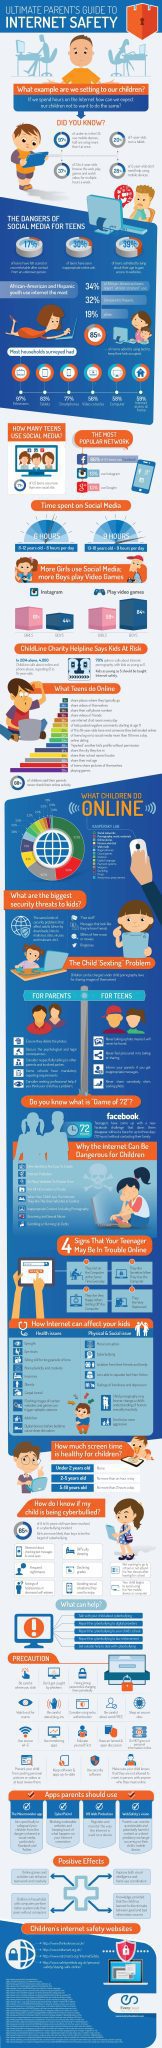 ultimate parents guide to internet safety infographic 2019